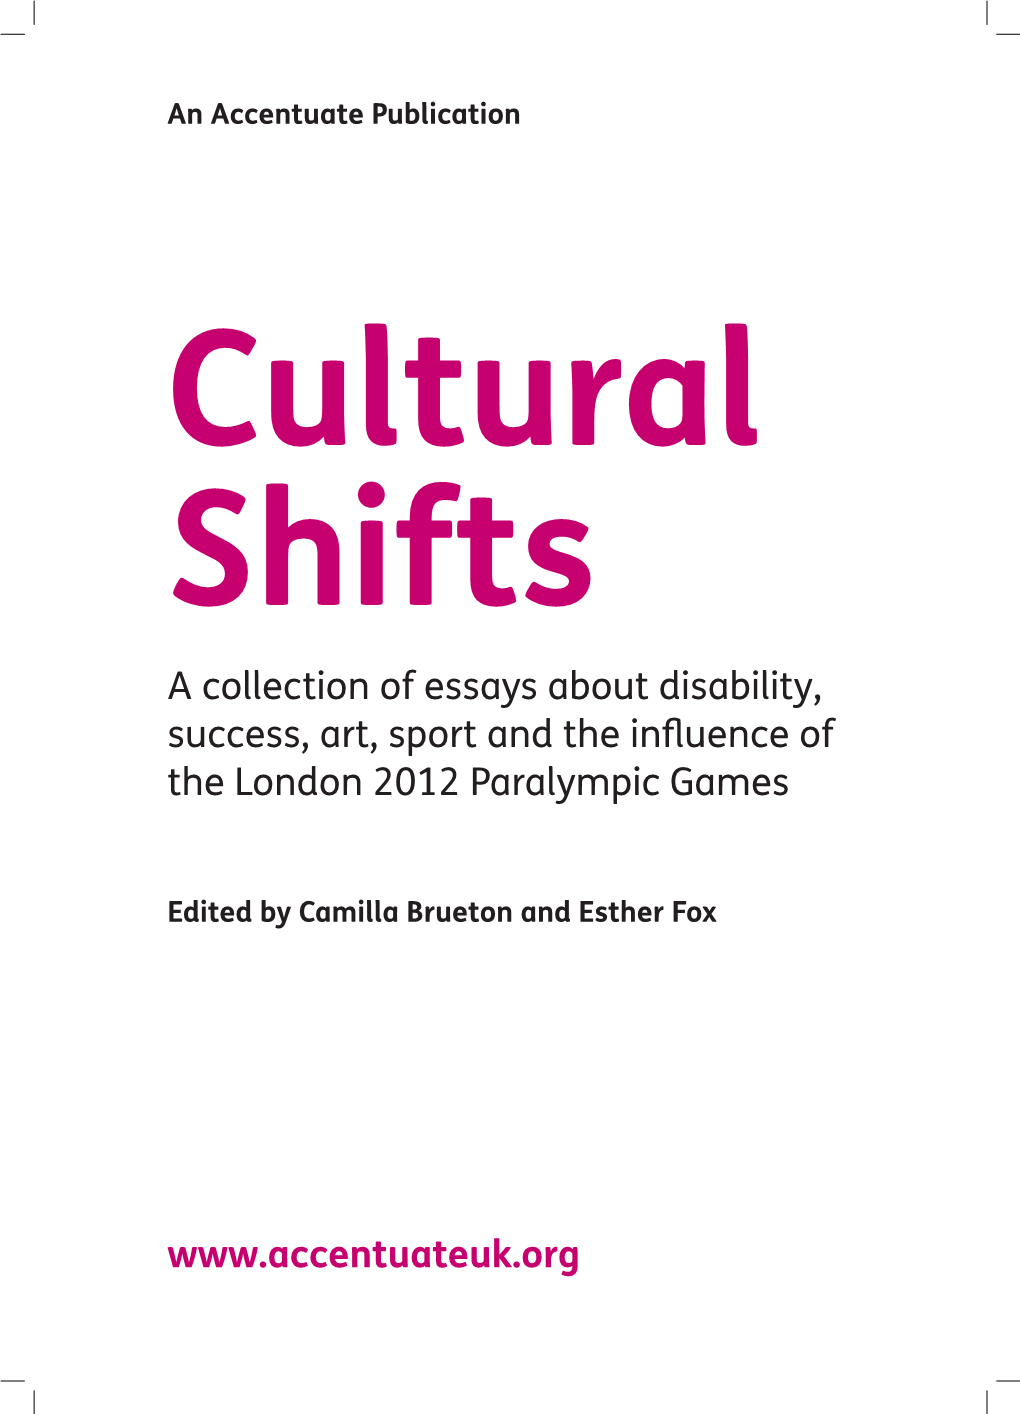 A Collection of Essays About Disability, Success, Art, Sport and the Influence of the London 2012 Paralympic Games